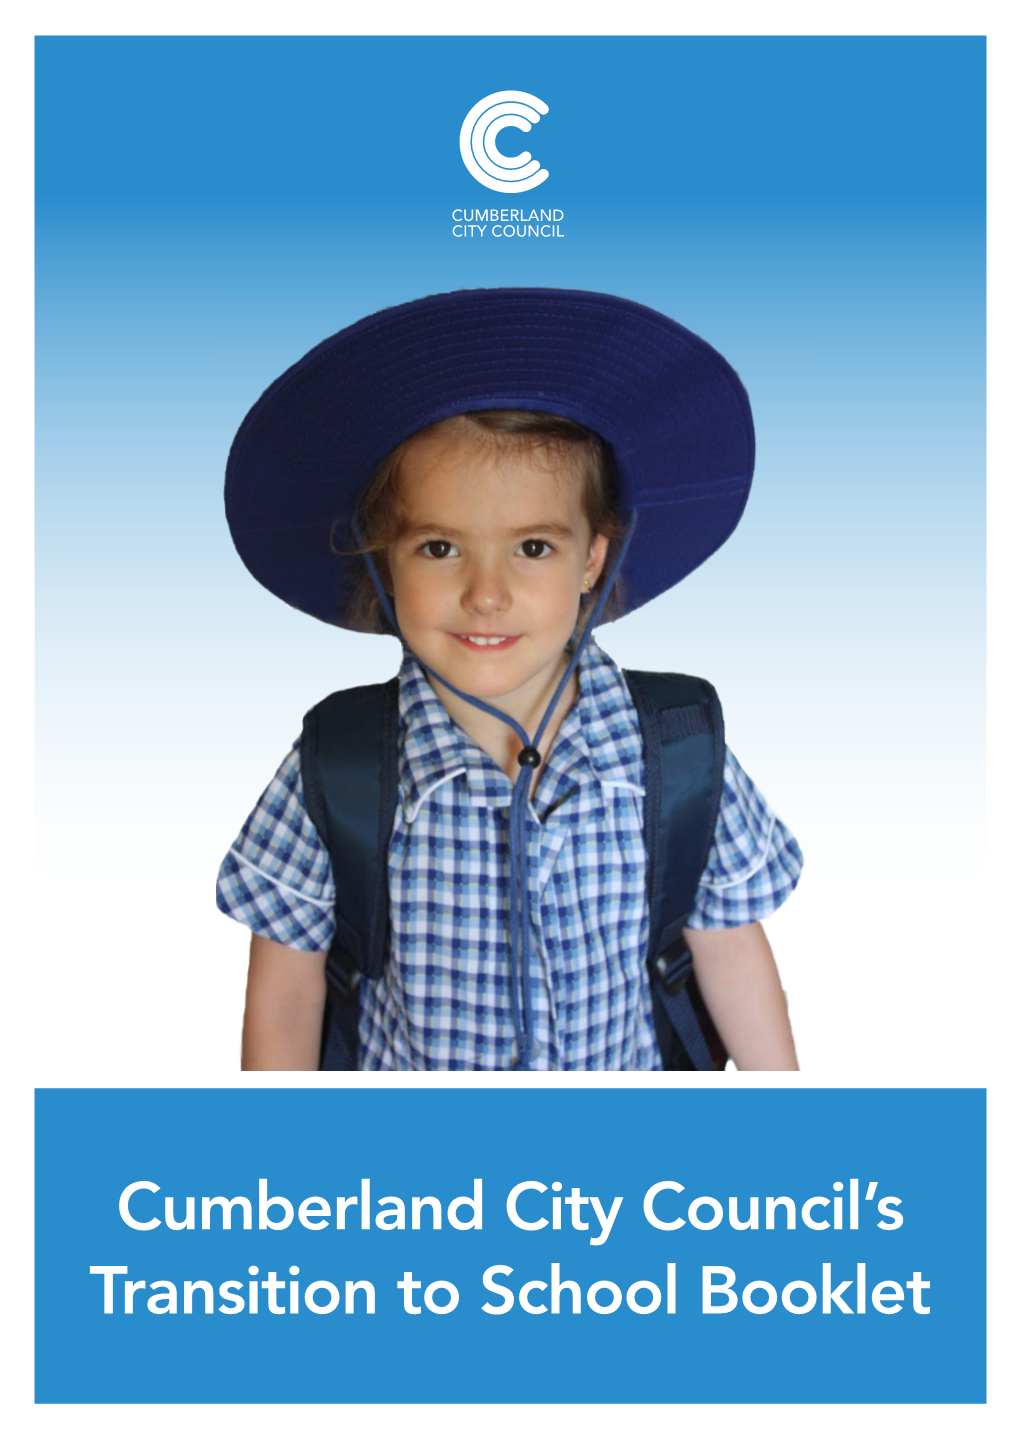 Cumberland City Council's Transition to School Booklet